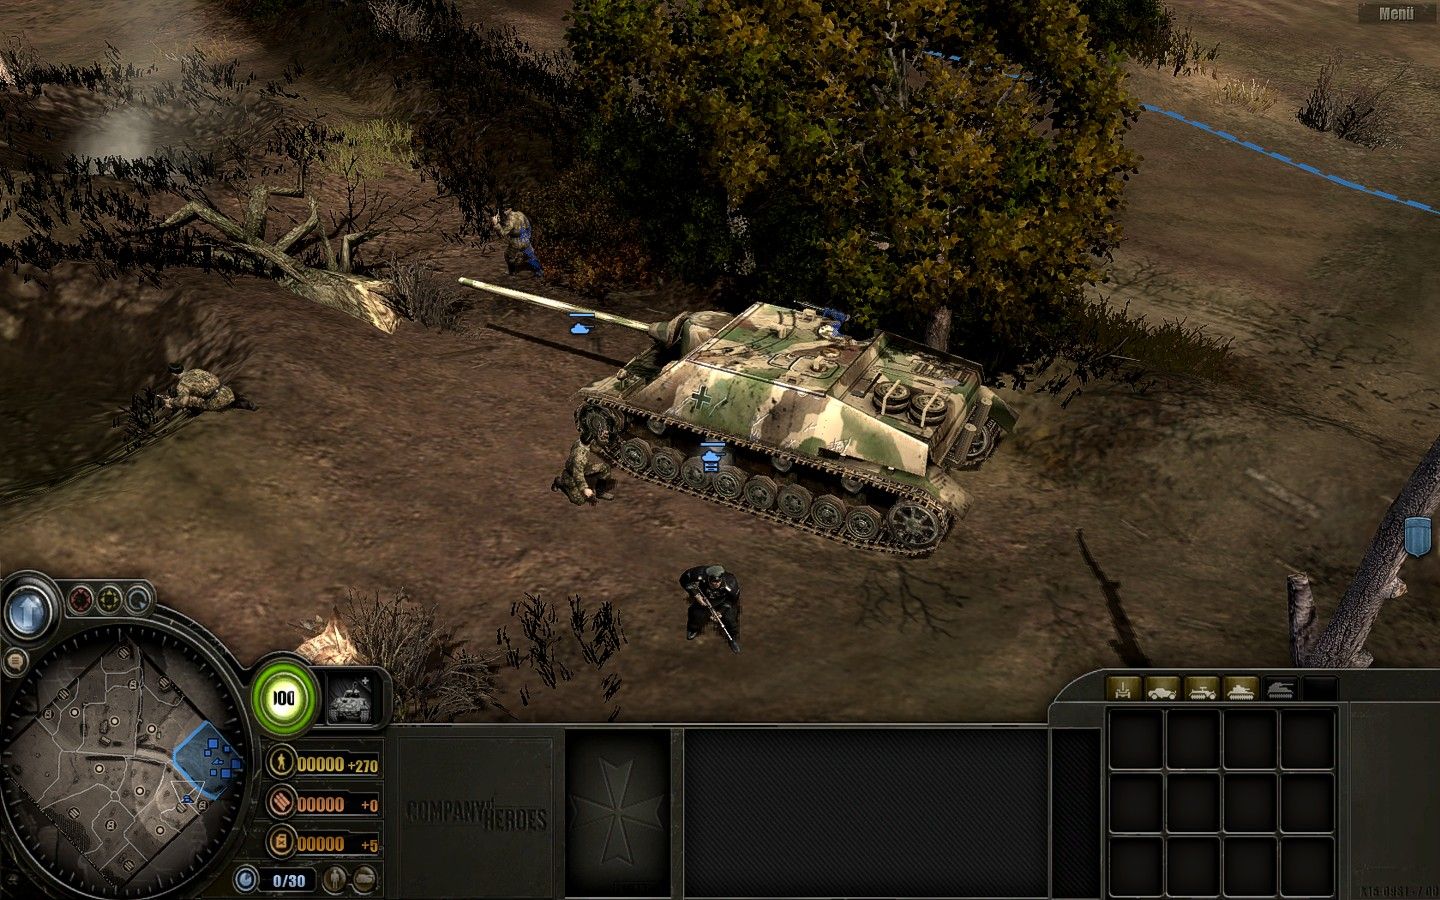 Company of heroes blitzkrieg mod 4.5 download